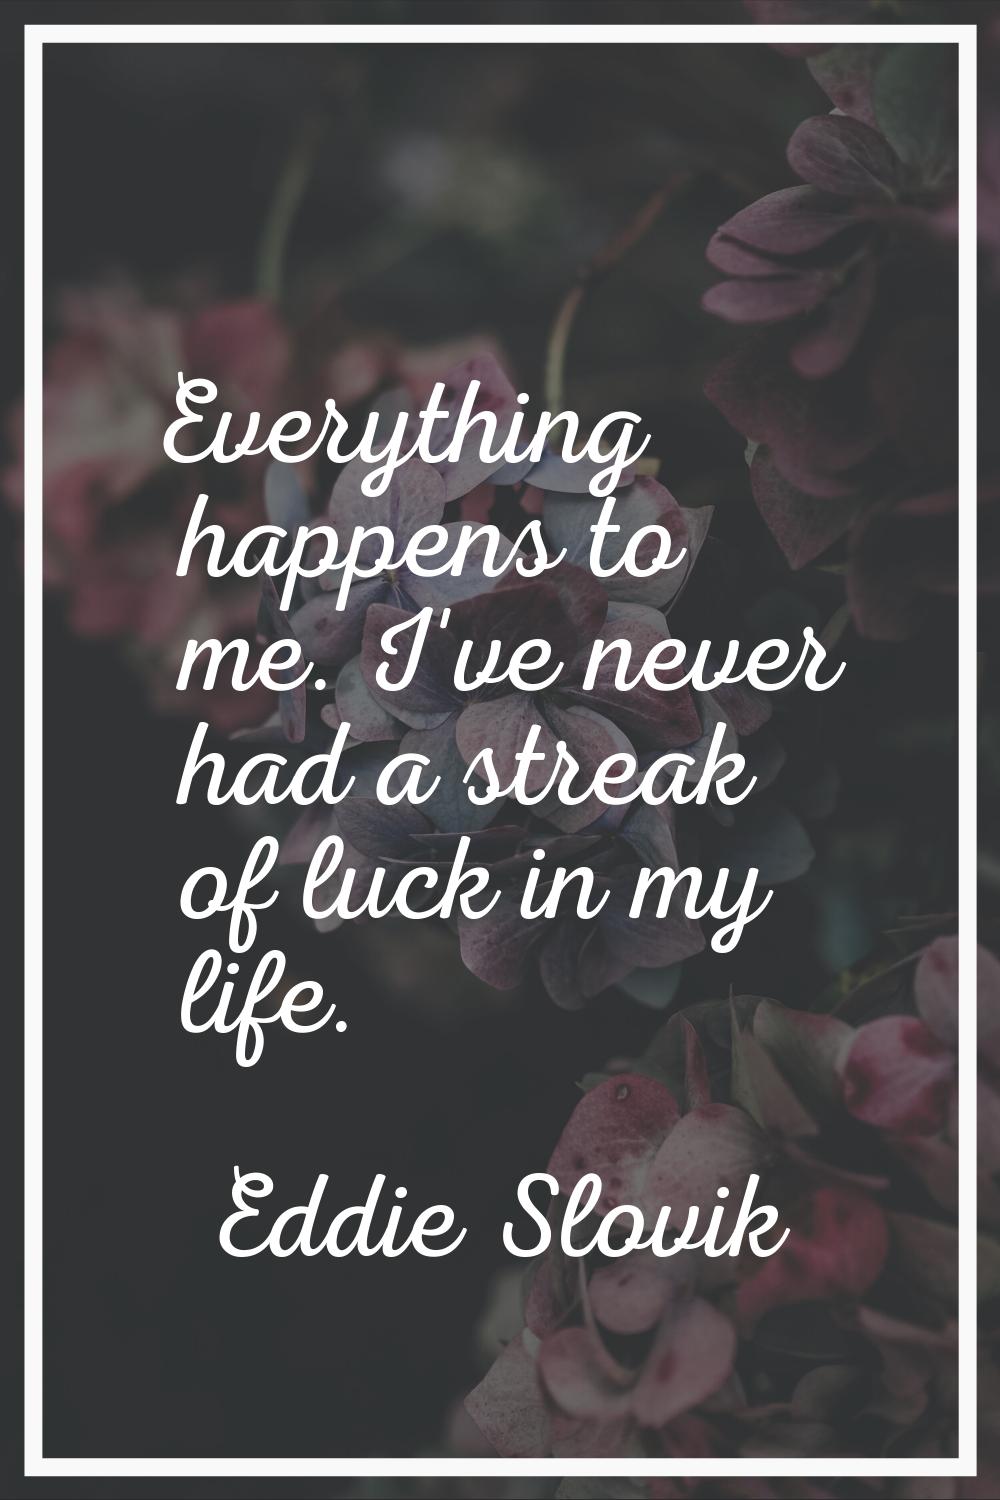 Everything happens to me. I've never had a streak of luck in my life.